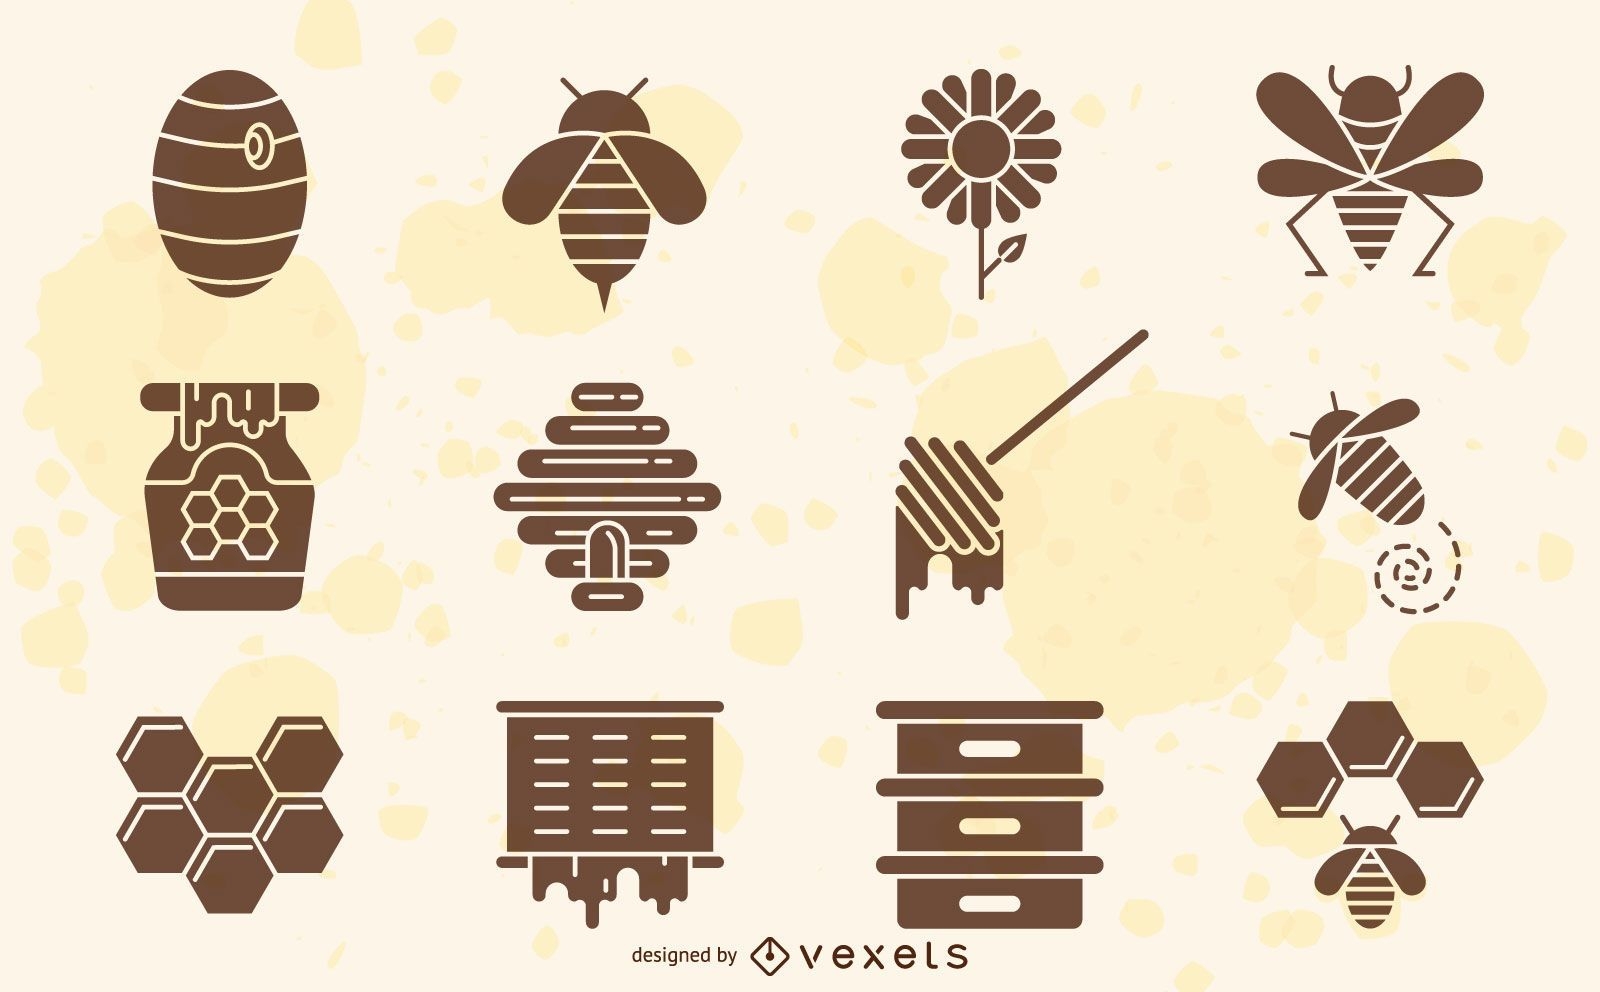 Bee elements collection